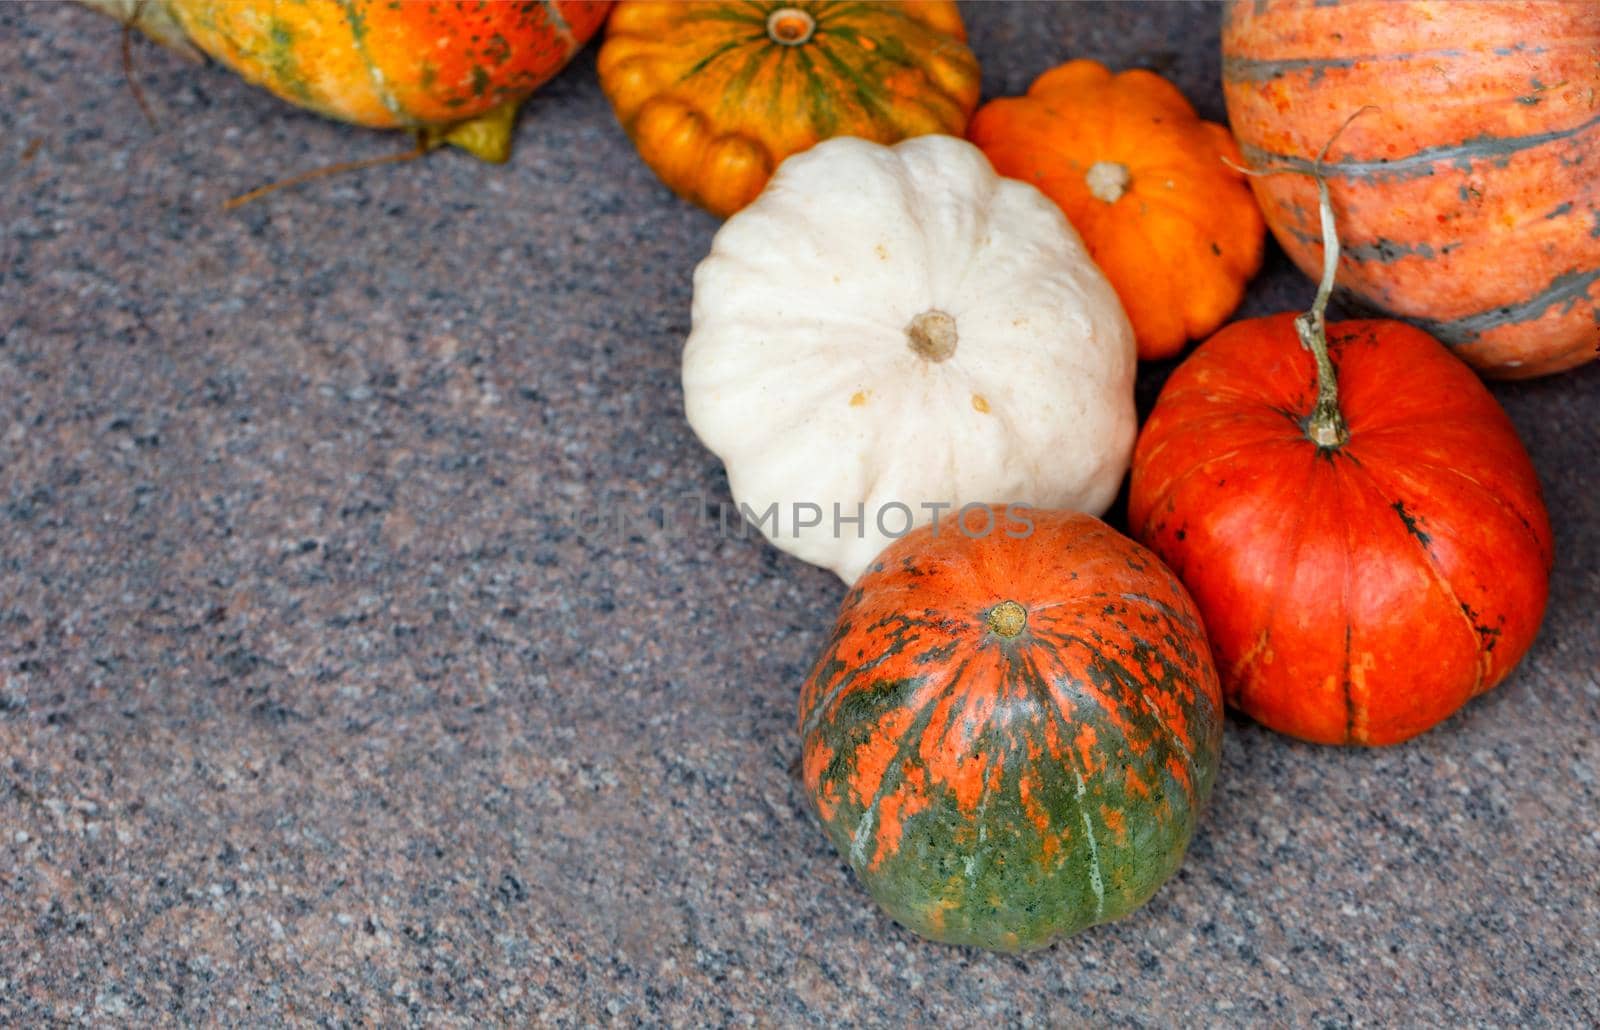 Several large orange and yellow ripe pumpkins and squash lay on a granite backdrop, selective focus.